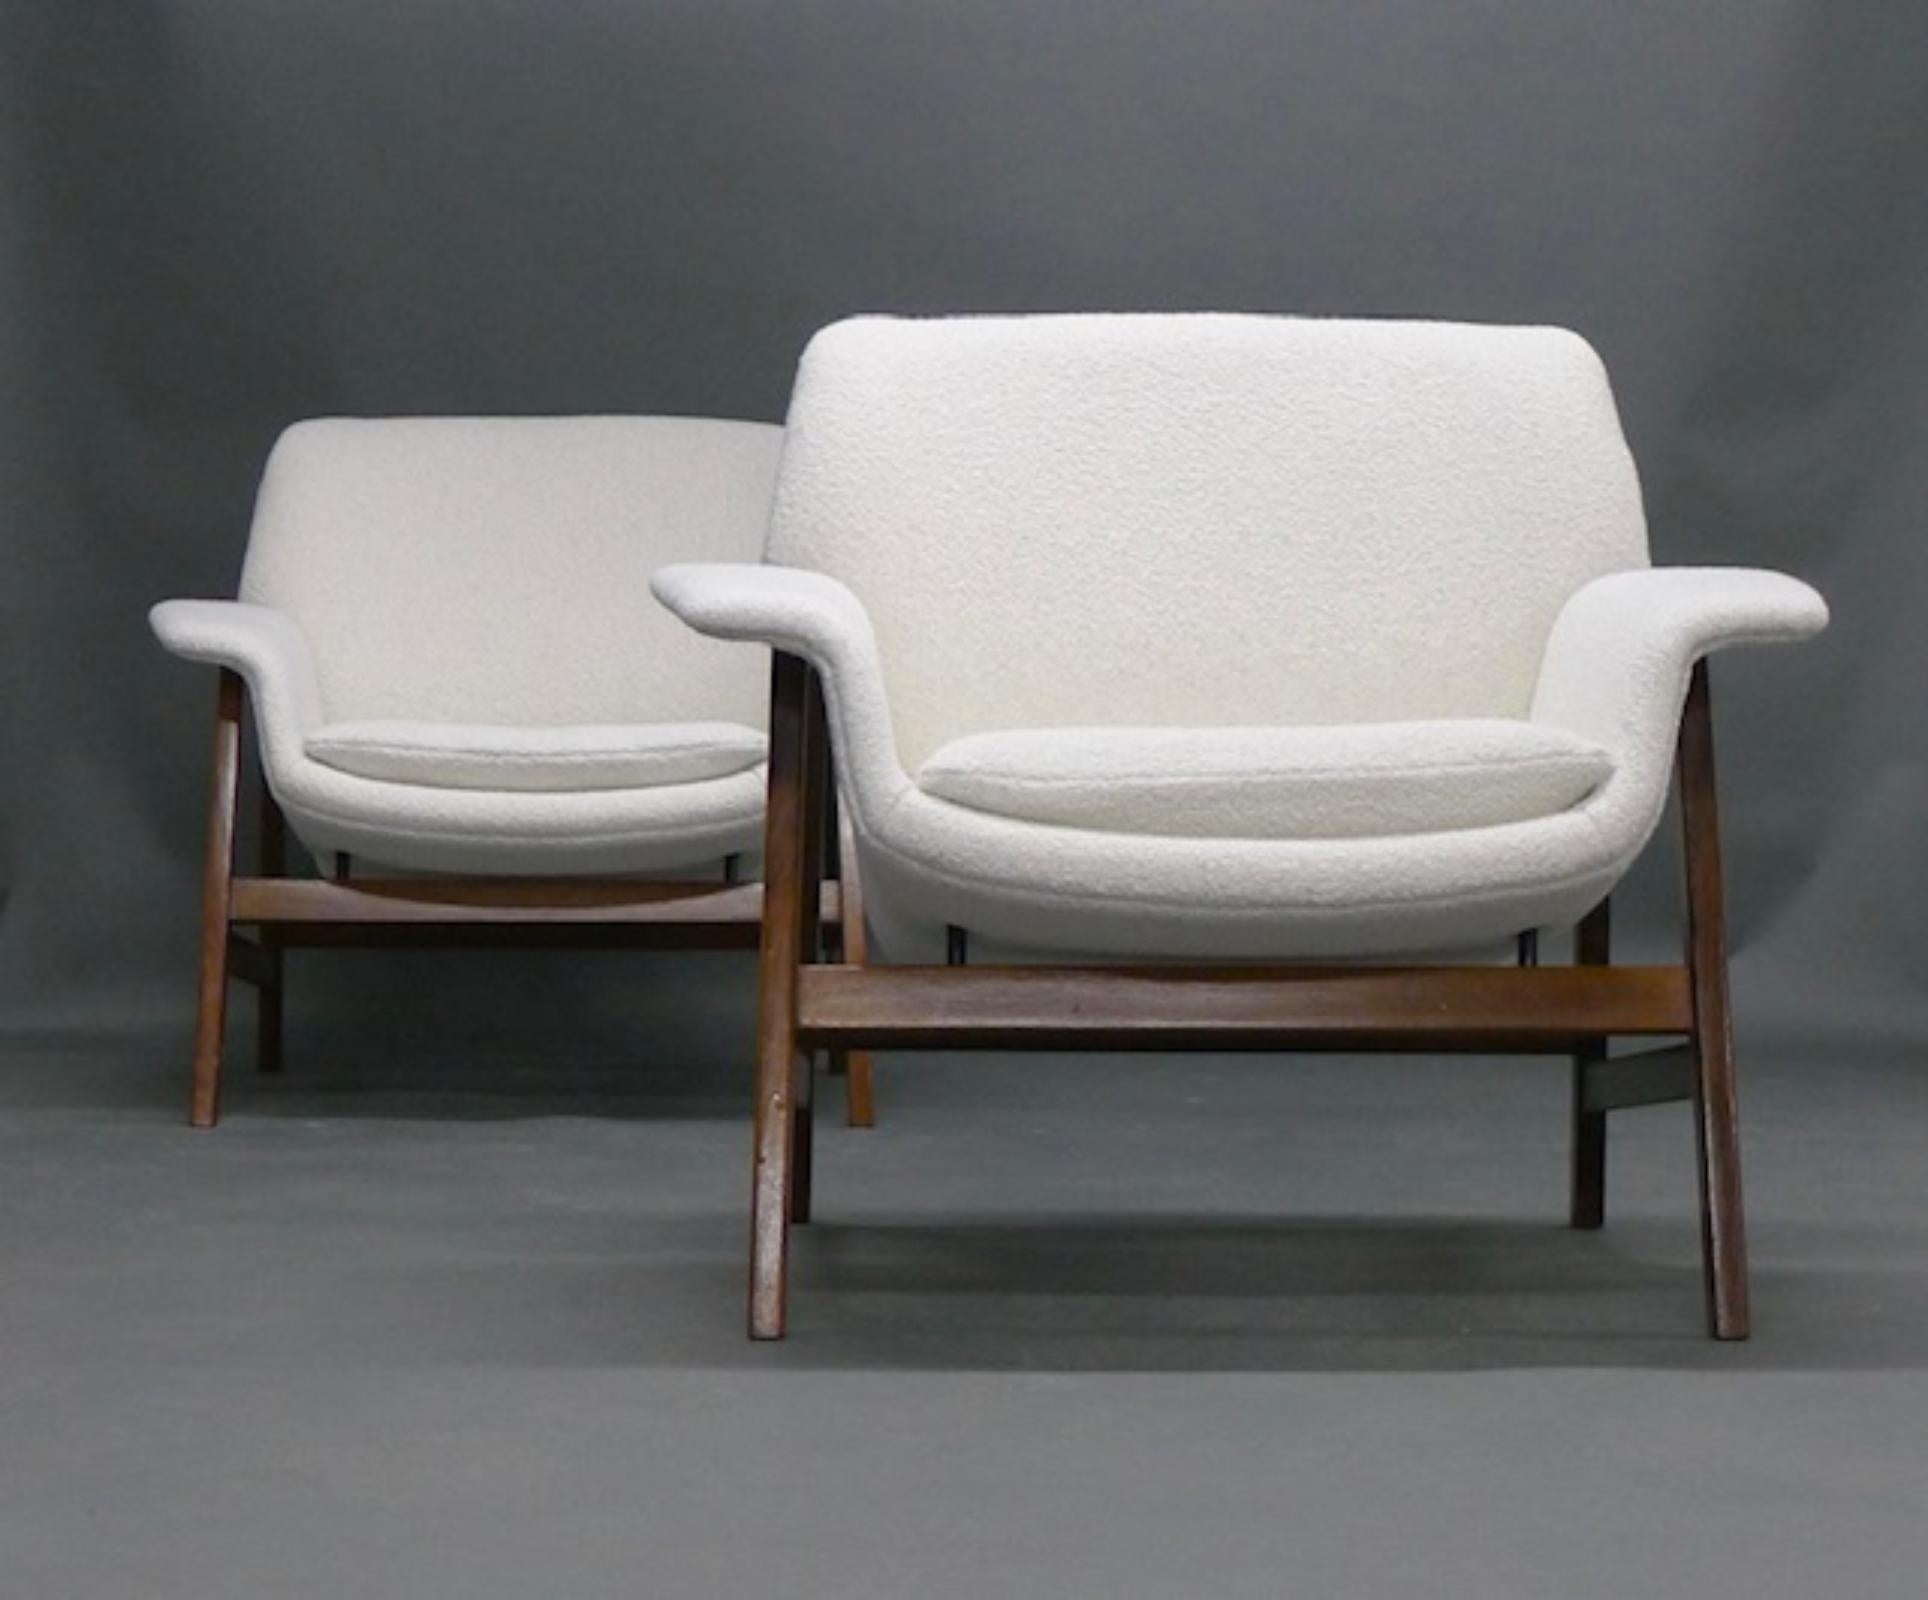 Stunning pair of lounge chairs, designed by Gianfranco Frattini and produced by Cassina, 1950s.

Model 849 in walnut, newly reupholstered in white bouclé fabric

74cm high, 84cm wide, 70cm deep, seat height 42cm

Price is for 2 chairs